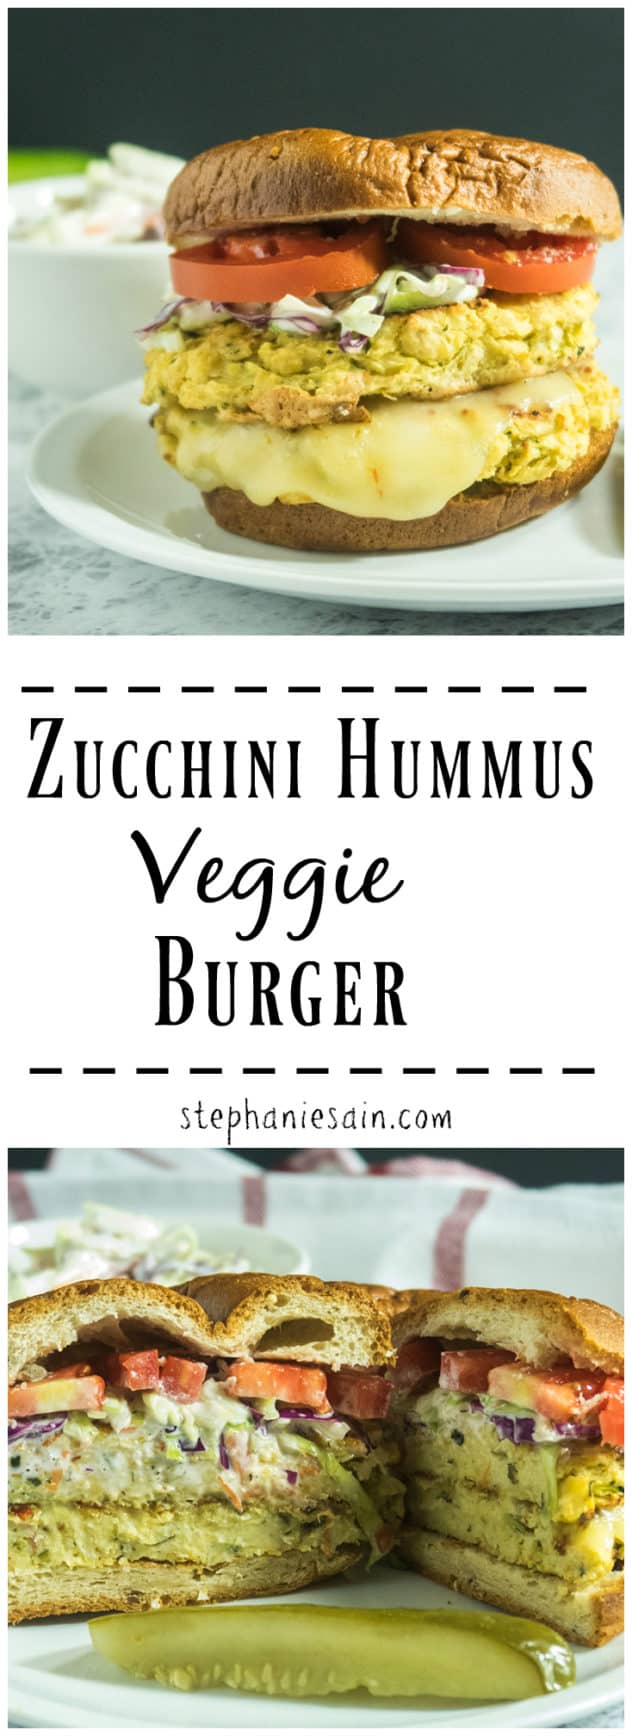 Zucchini Hummus Veggie Burgers are a tasty, healthier way to switch up burger night. Made with only a few ingredients for a super moist burger flavored with tahini and topped with all of your favorite toppings. Gluten Free, Vegetarian, Vegan option.